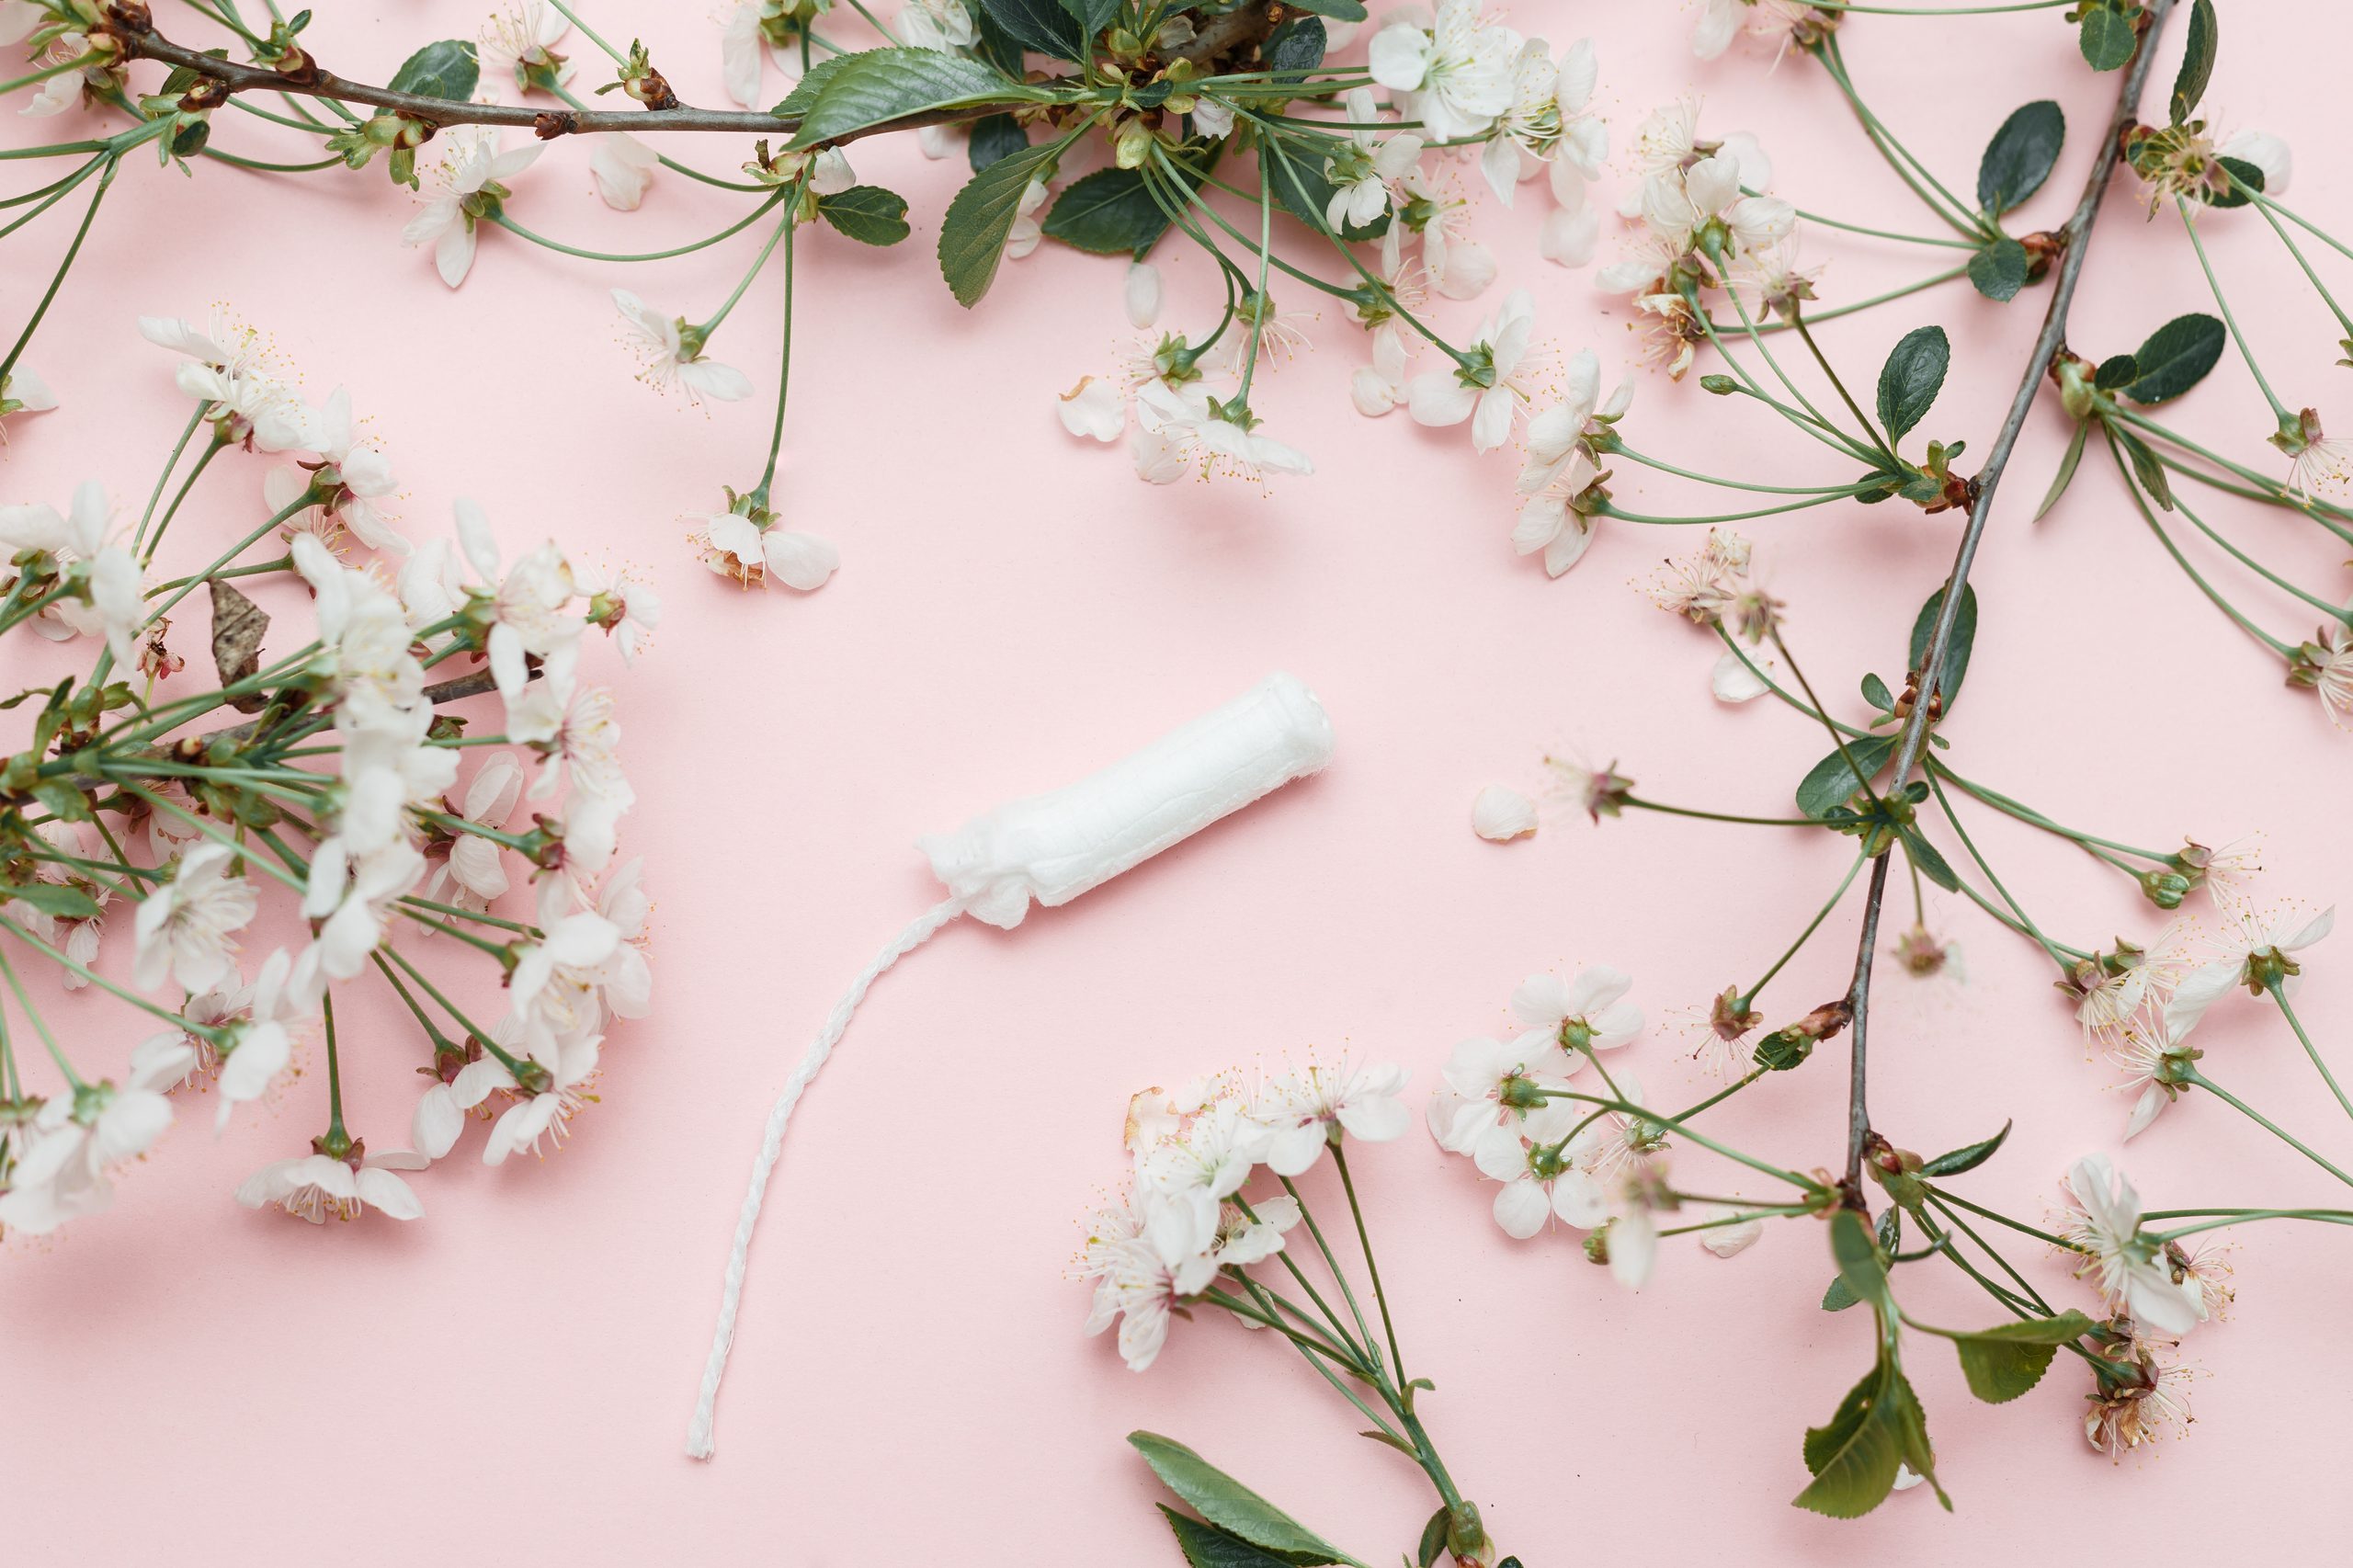 Hygienic tampon and sanitary napkin for every day with pink and white panties with green flowers on a white background.